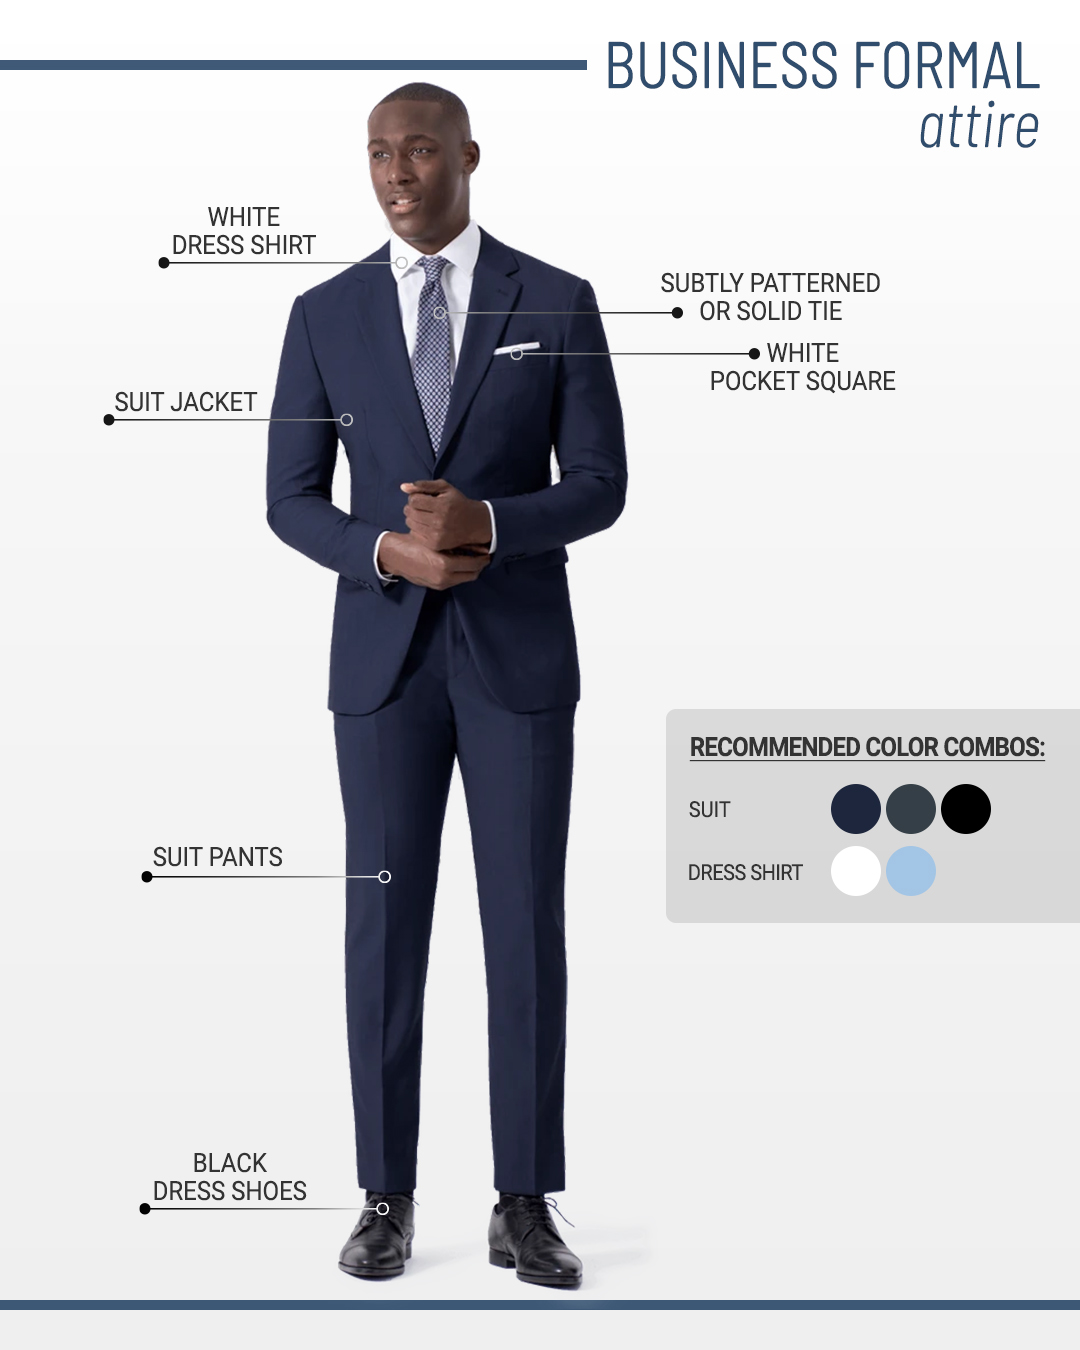 Business formal occasions require wearing a suit